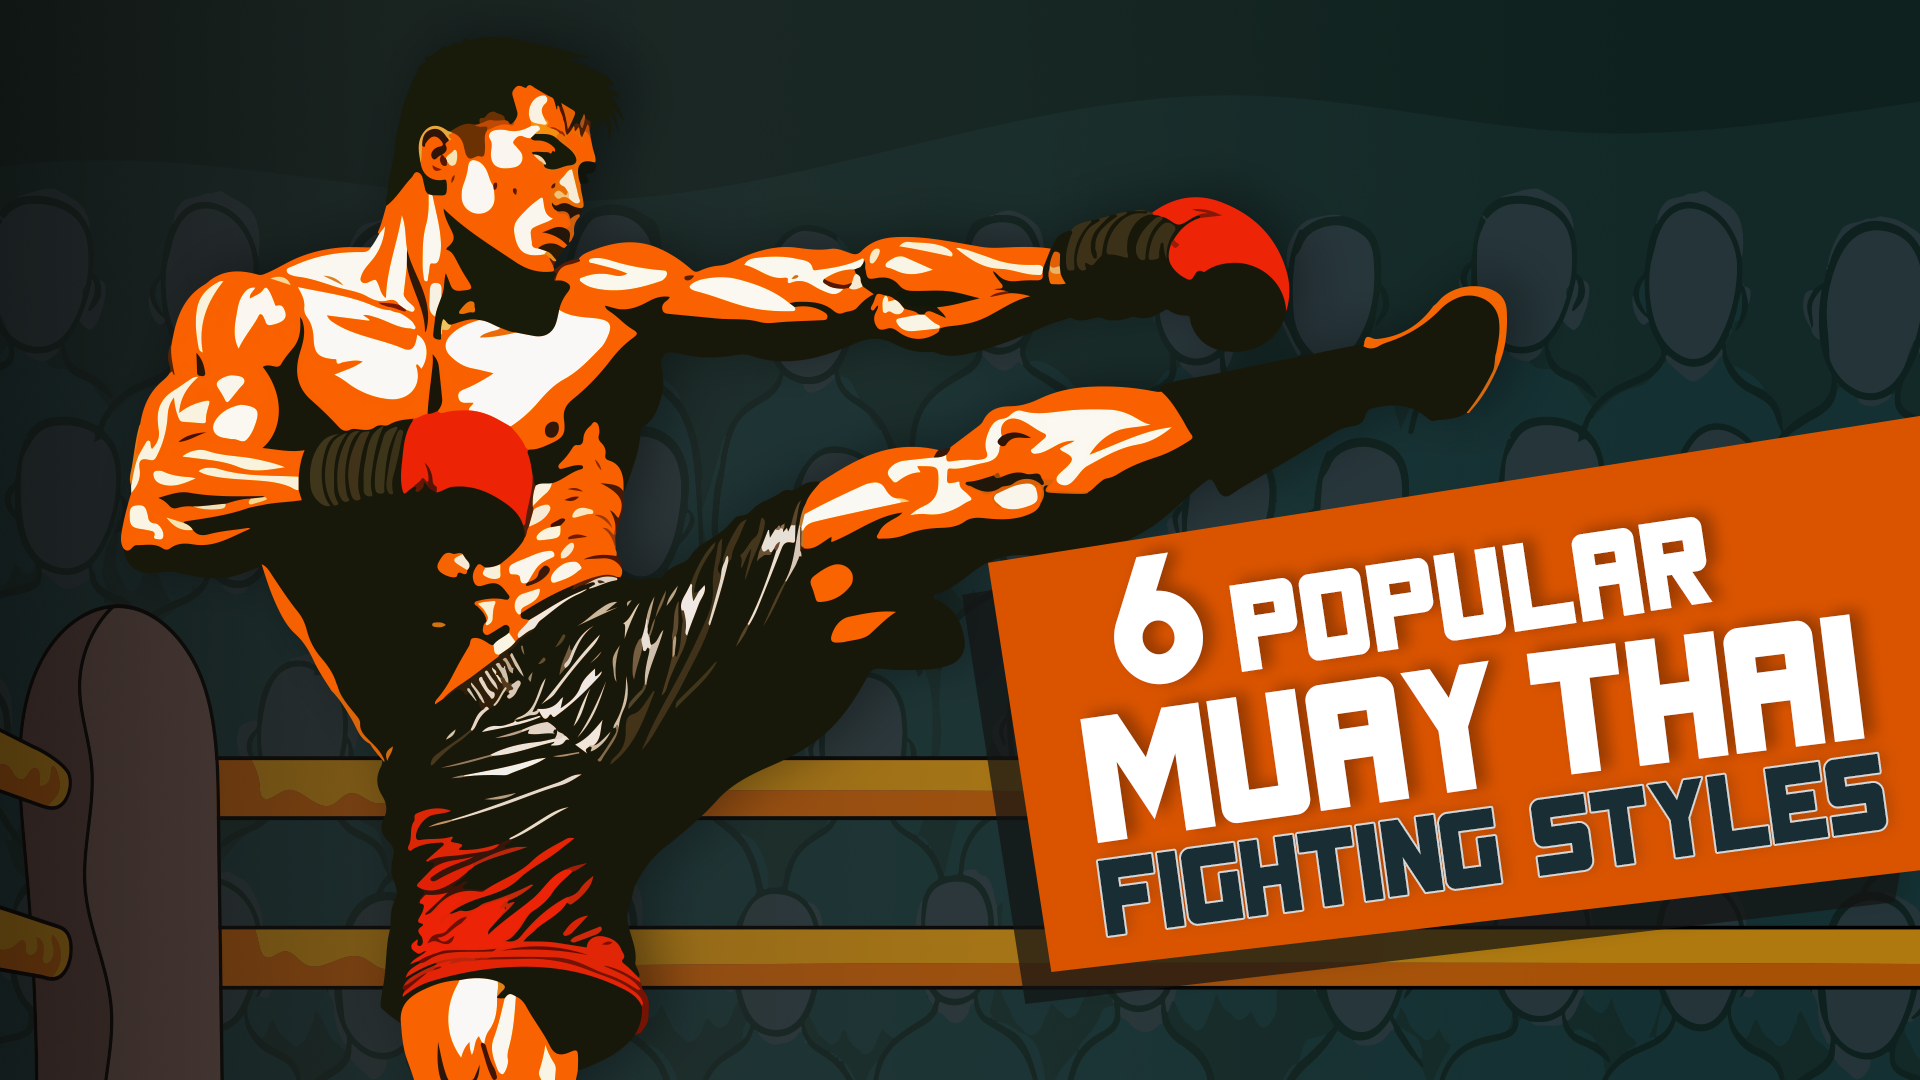 6 Popular Muay Thai Fighting Styles you Should Learn